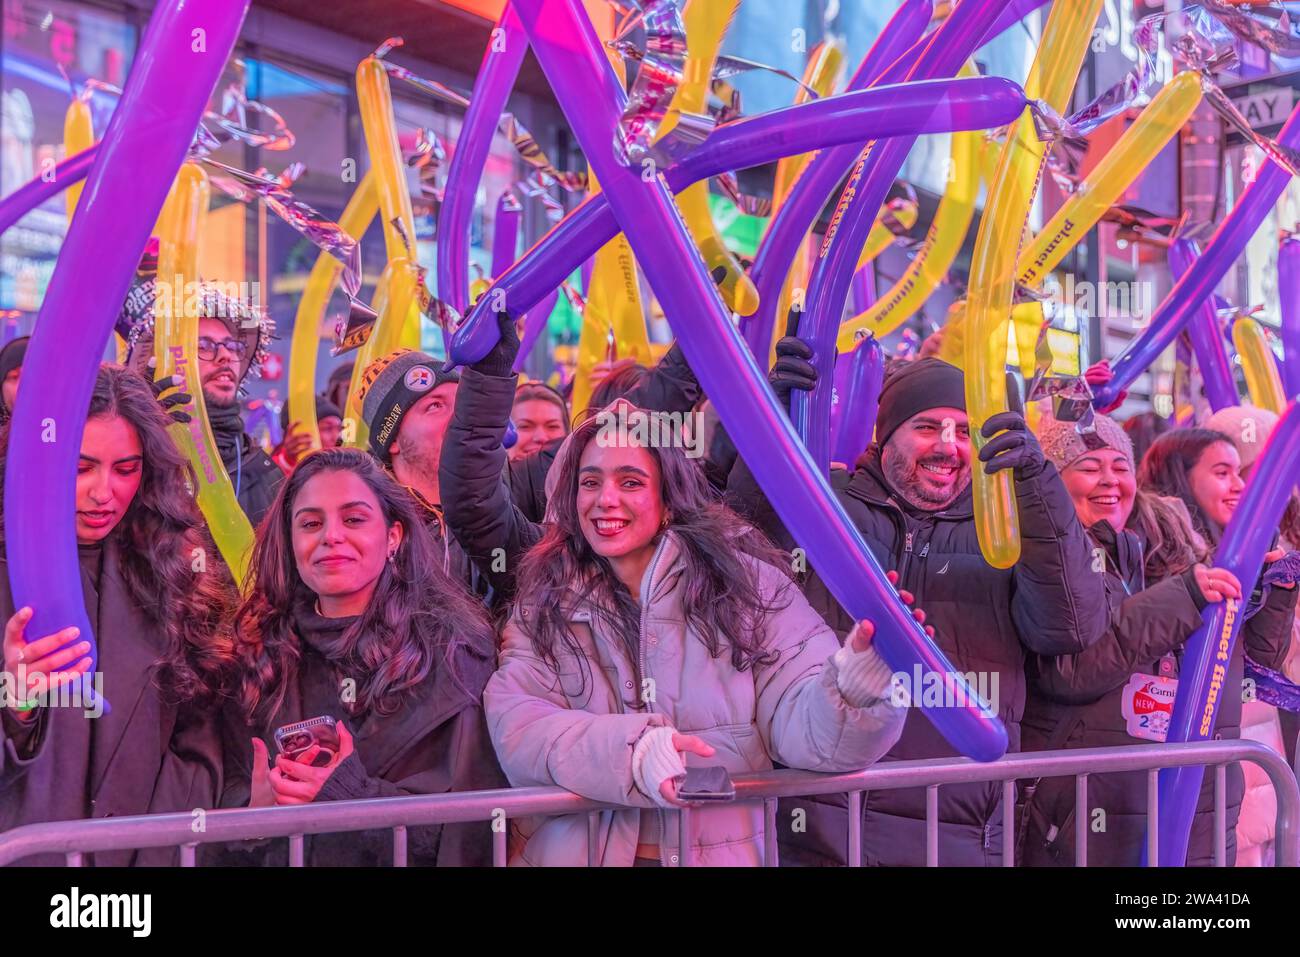 NEW YORK, N.Y. – December 31, 2023: New Year’s Eve revelers gather in Times Square. Stock Photo